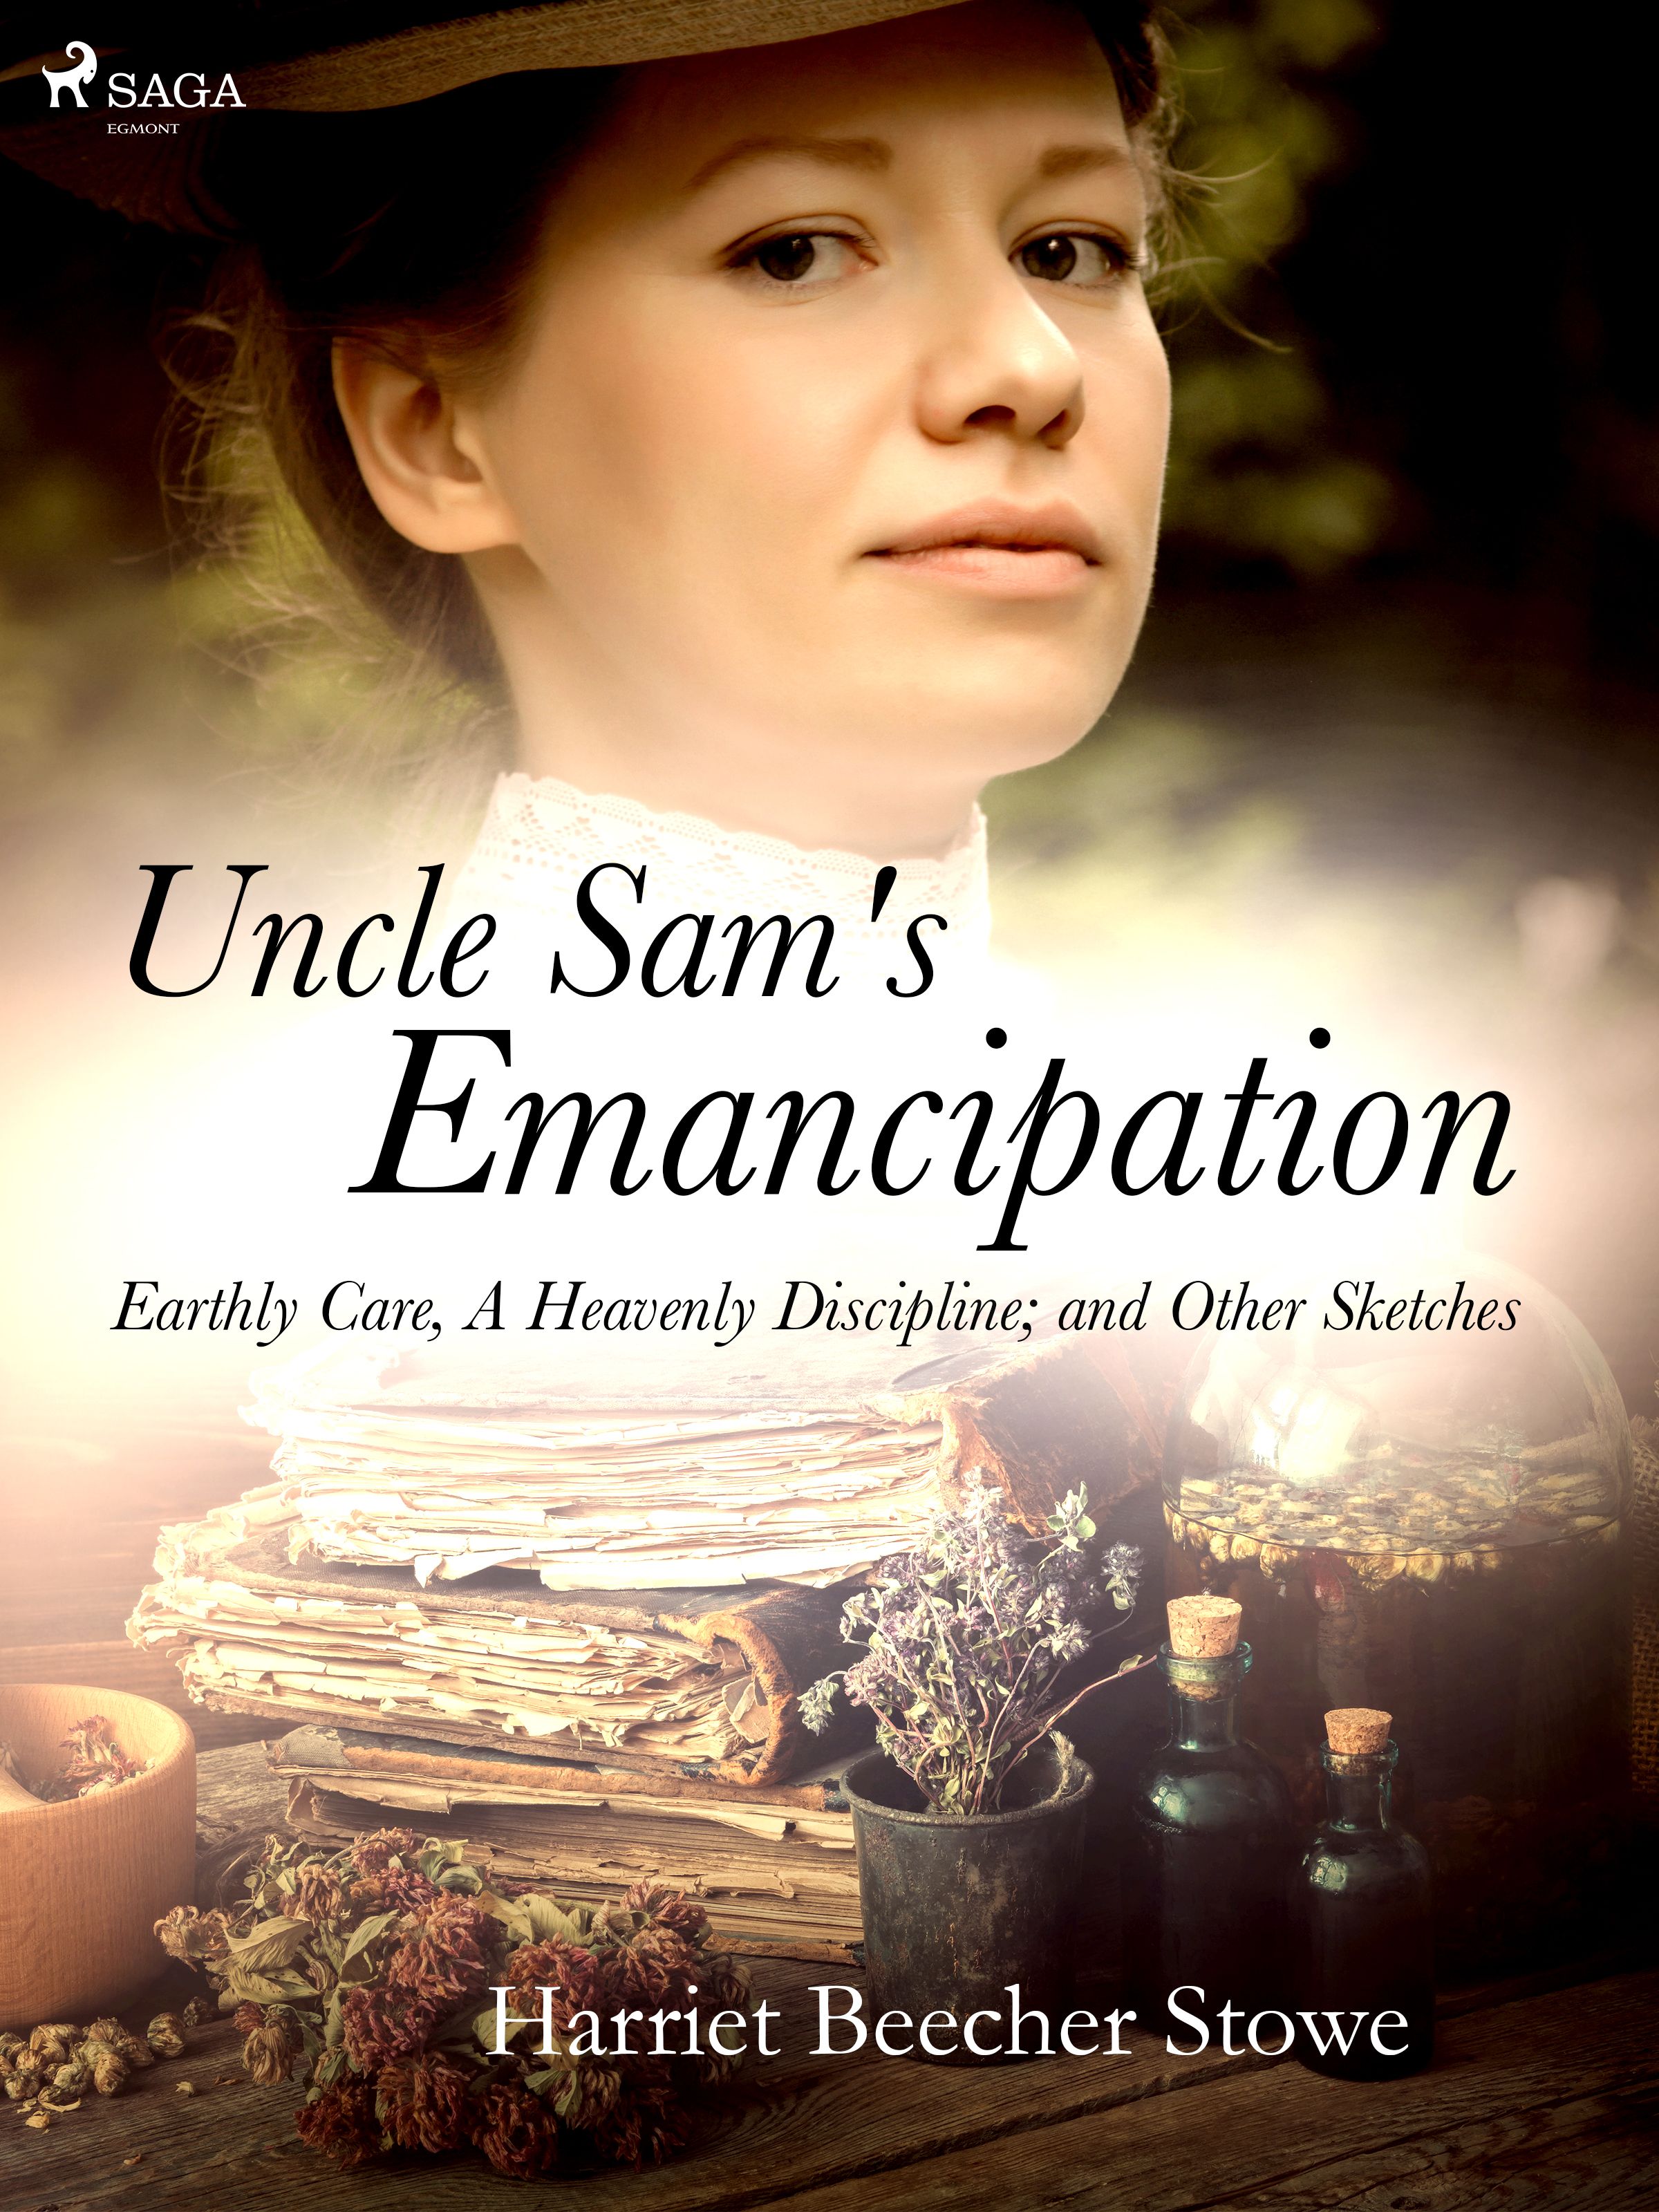 Uncle Sam's Emancipation; Earthly Care, A Heavenly Discipline; and Other Sketches, e-bok av Harriet Beecher-Stowe